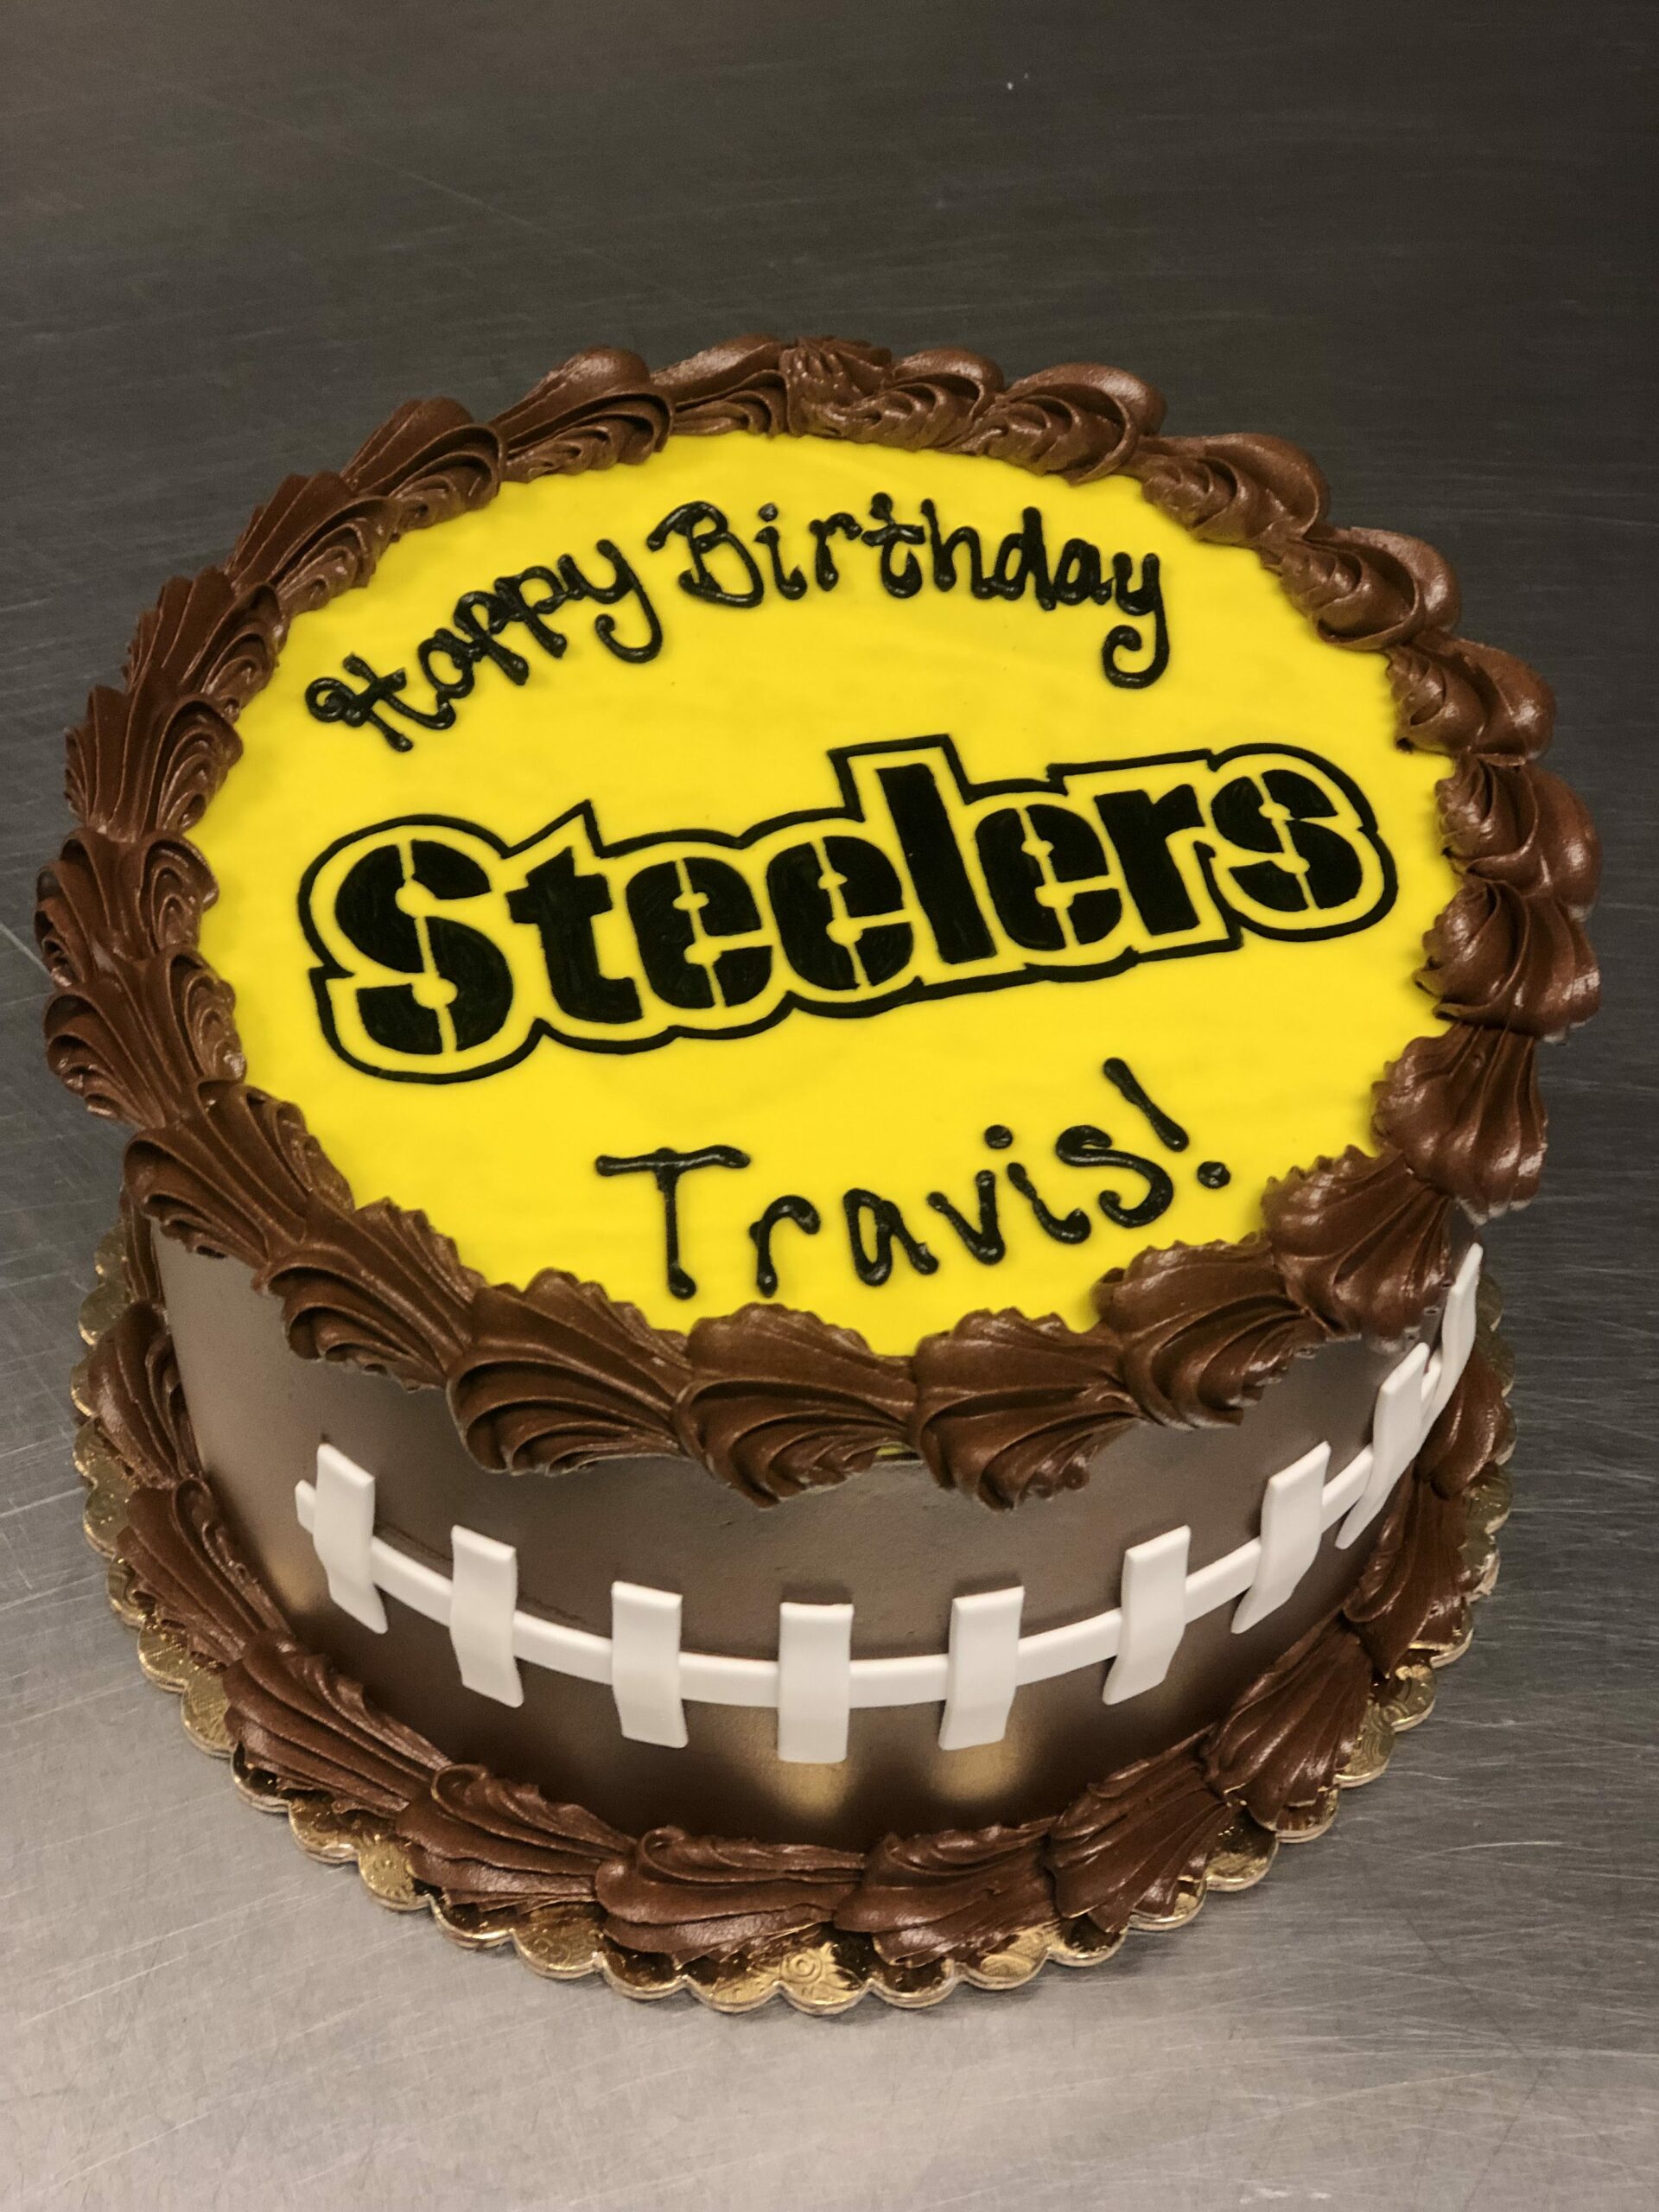 Little brother's birthday cake! : r/steelers